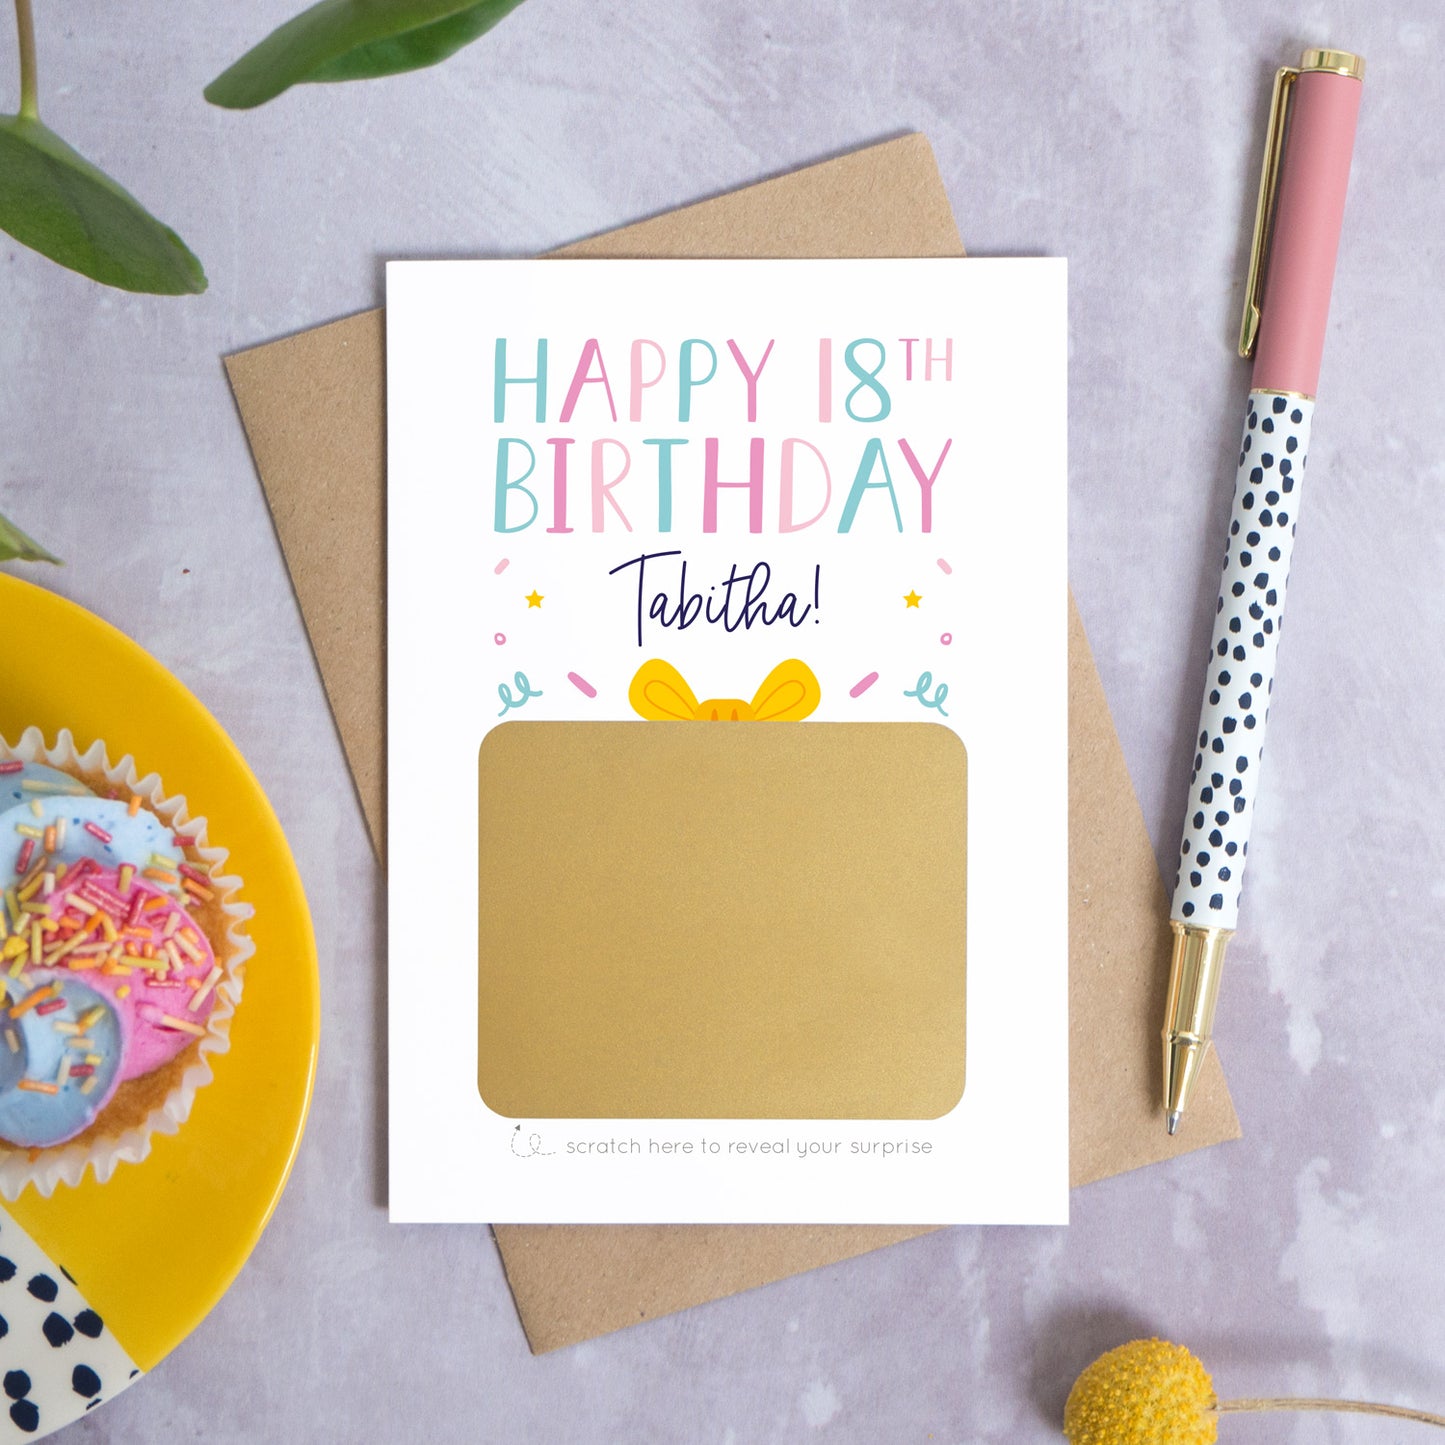 A personalised happy 18th birthday scratch card that has been photographed flat lay style on a grey concrete style background surrounded with foliage, a cupcake and a pen. The card itself shows how it will arrive and looks when it is completely unscratched.